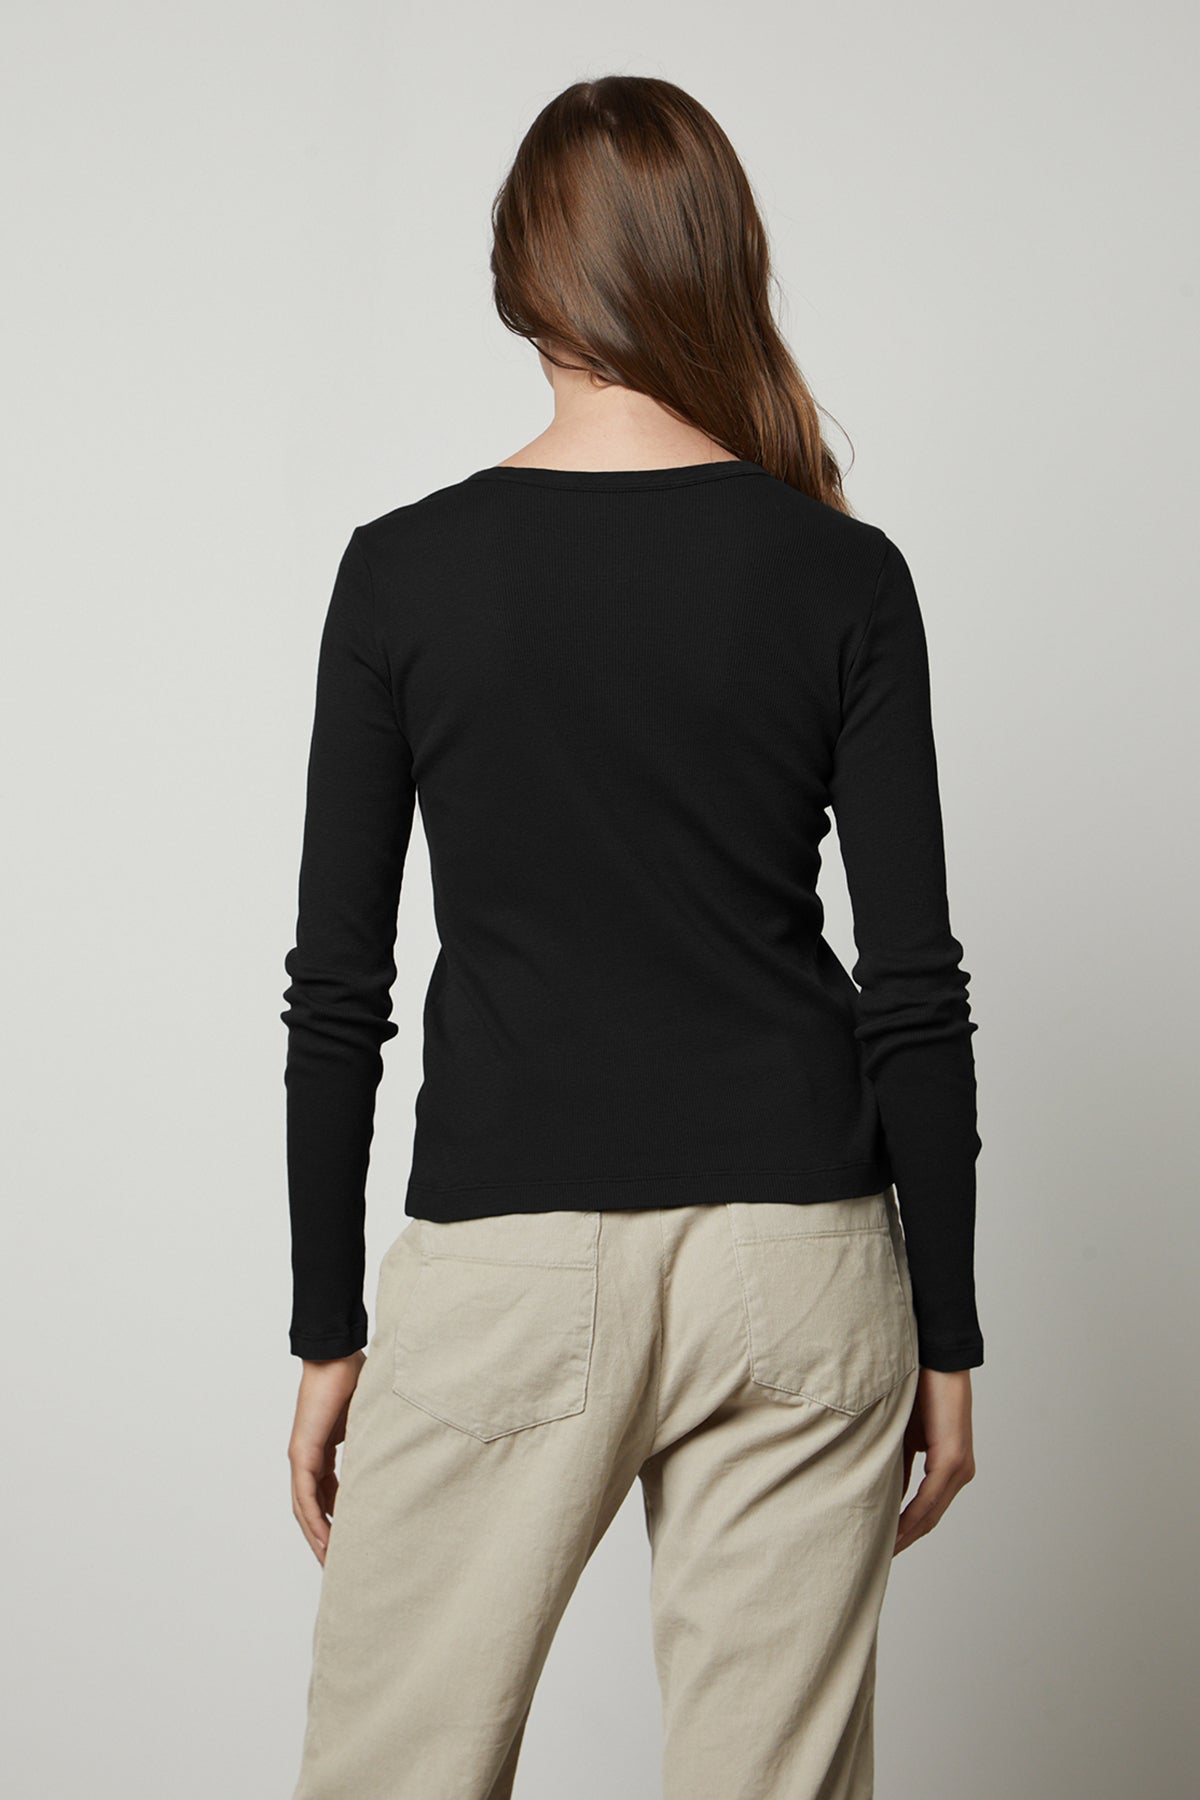 The back view of a woman wearing a Velvet by Graham & Spencer BAYLER RIBBED SCOOP NECK TEE and beige pants.-35782696861889